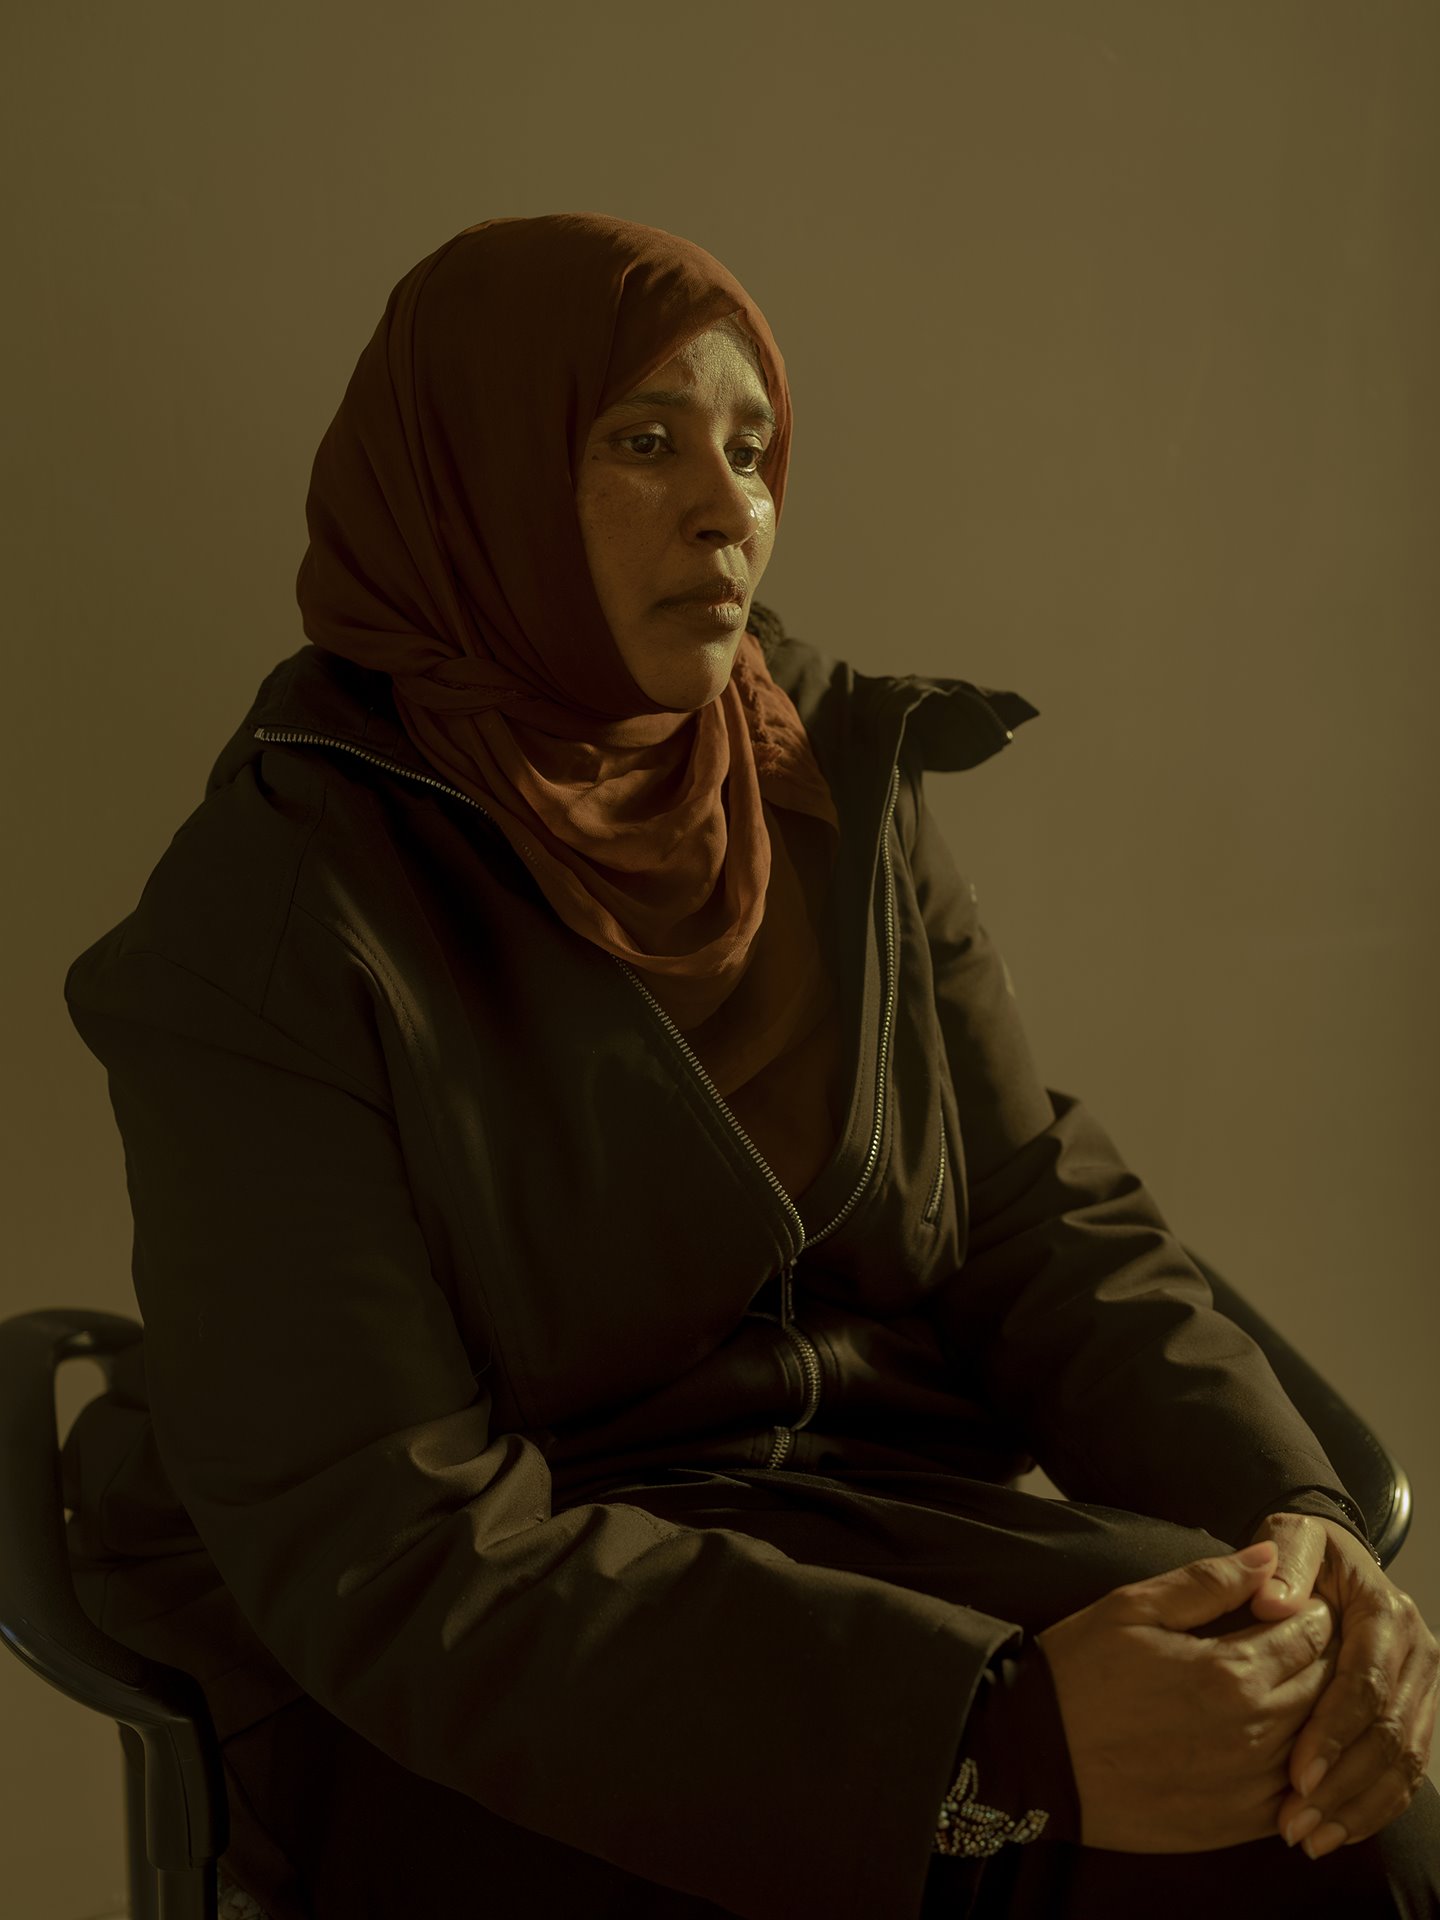 Hinda Guled, originally from Somalia, arrived in the US from a refugee camp in 2013. She had a job at a meatpacking plant, until she was burned during a shift. Since then, she has been unable to work.